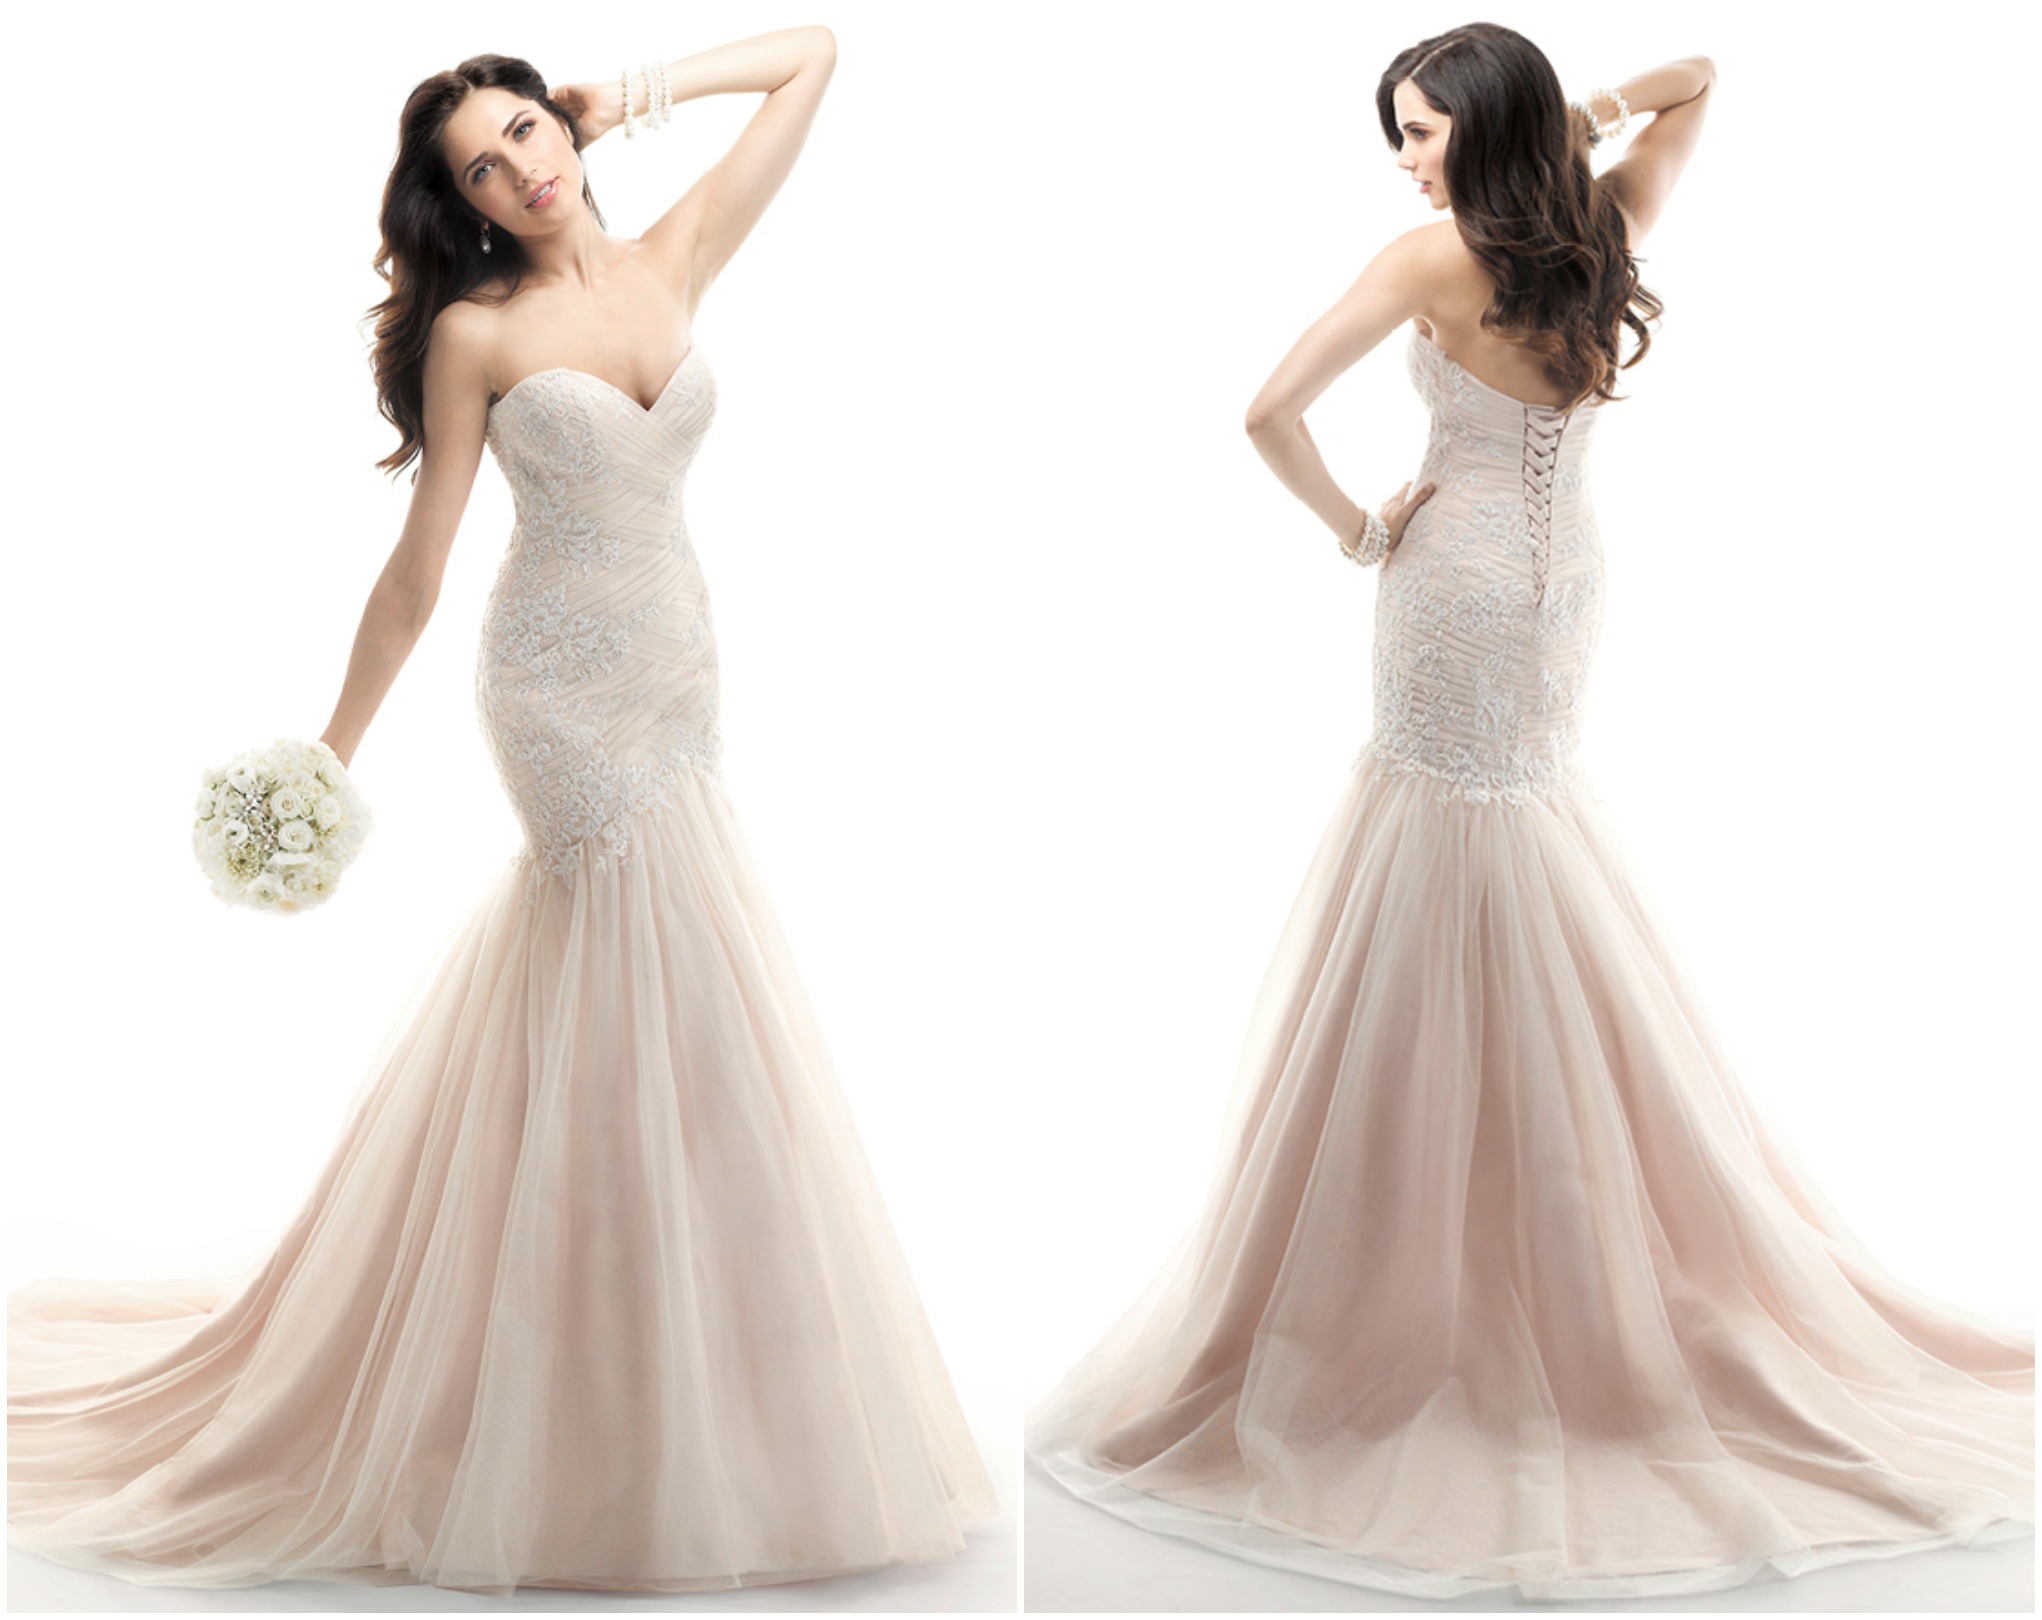 <a href="http://www.maggiesottero.com/dress.aspx?style=4MT892" target="_blank">Maggie Sottero</a>